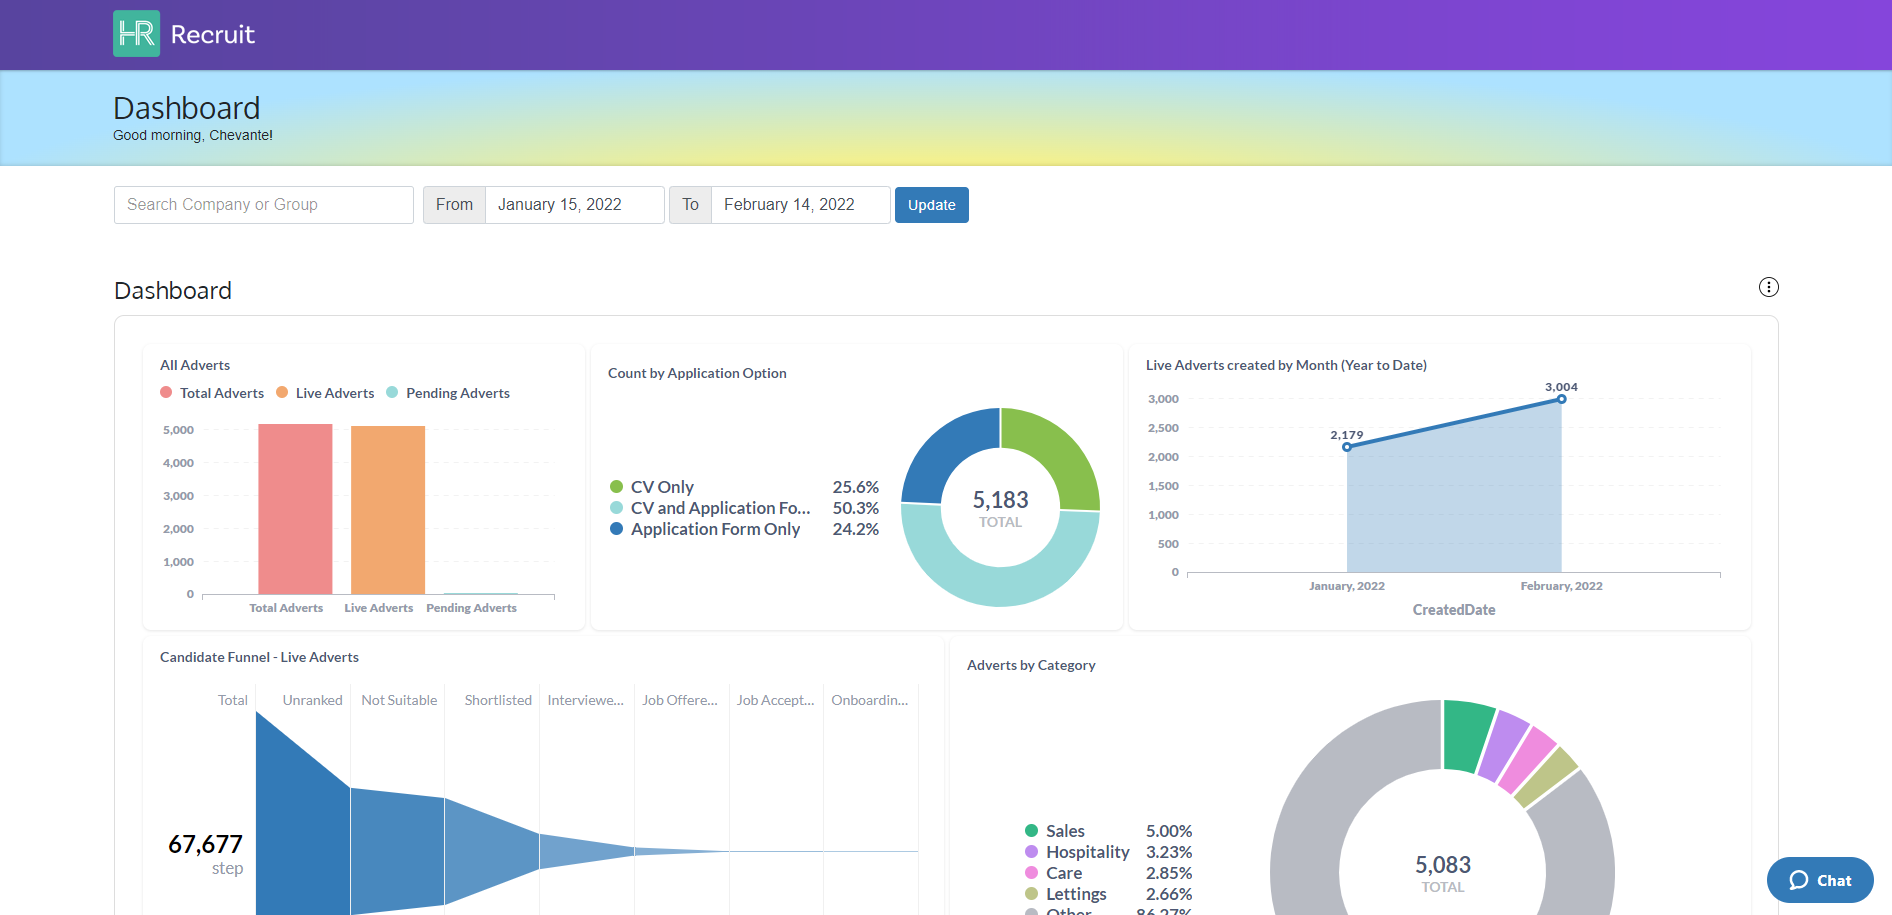 HireRoad Software - Track, review, and analyze your recruitment efforts through a centralized dashboard.